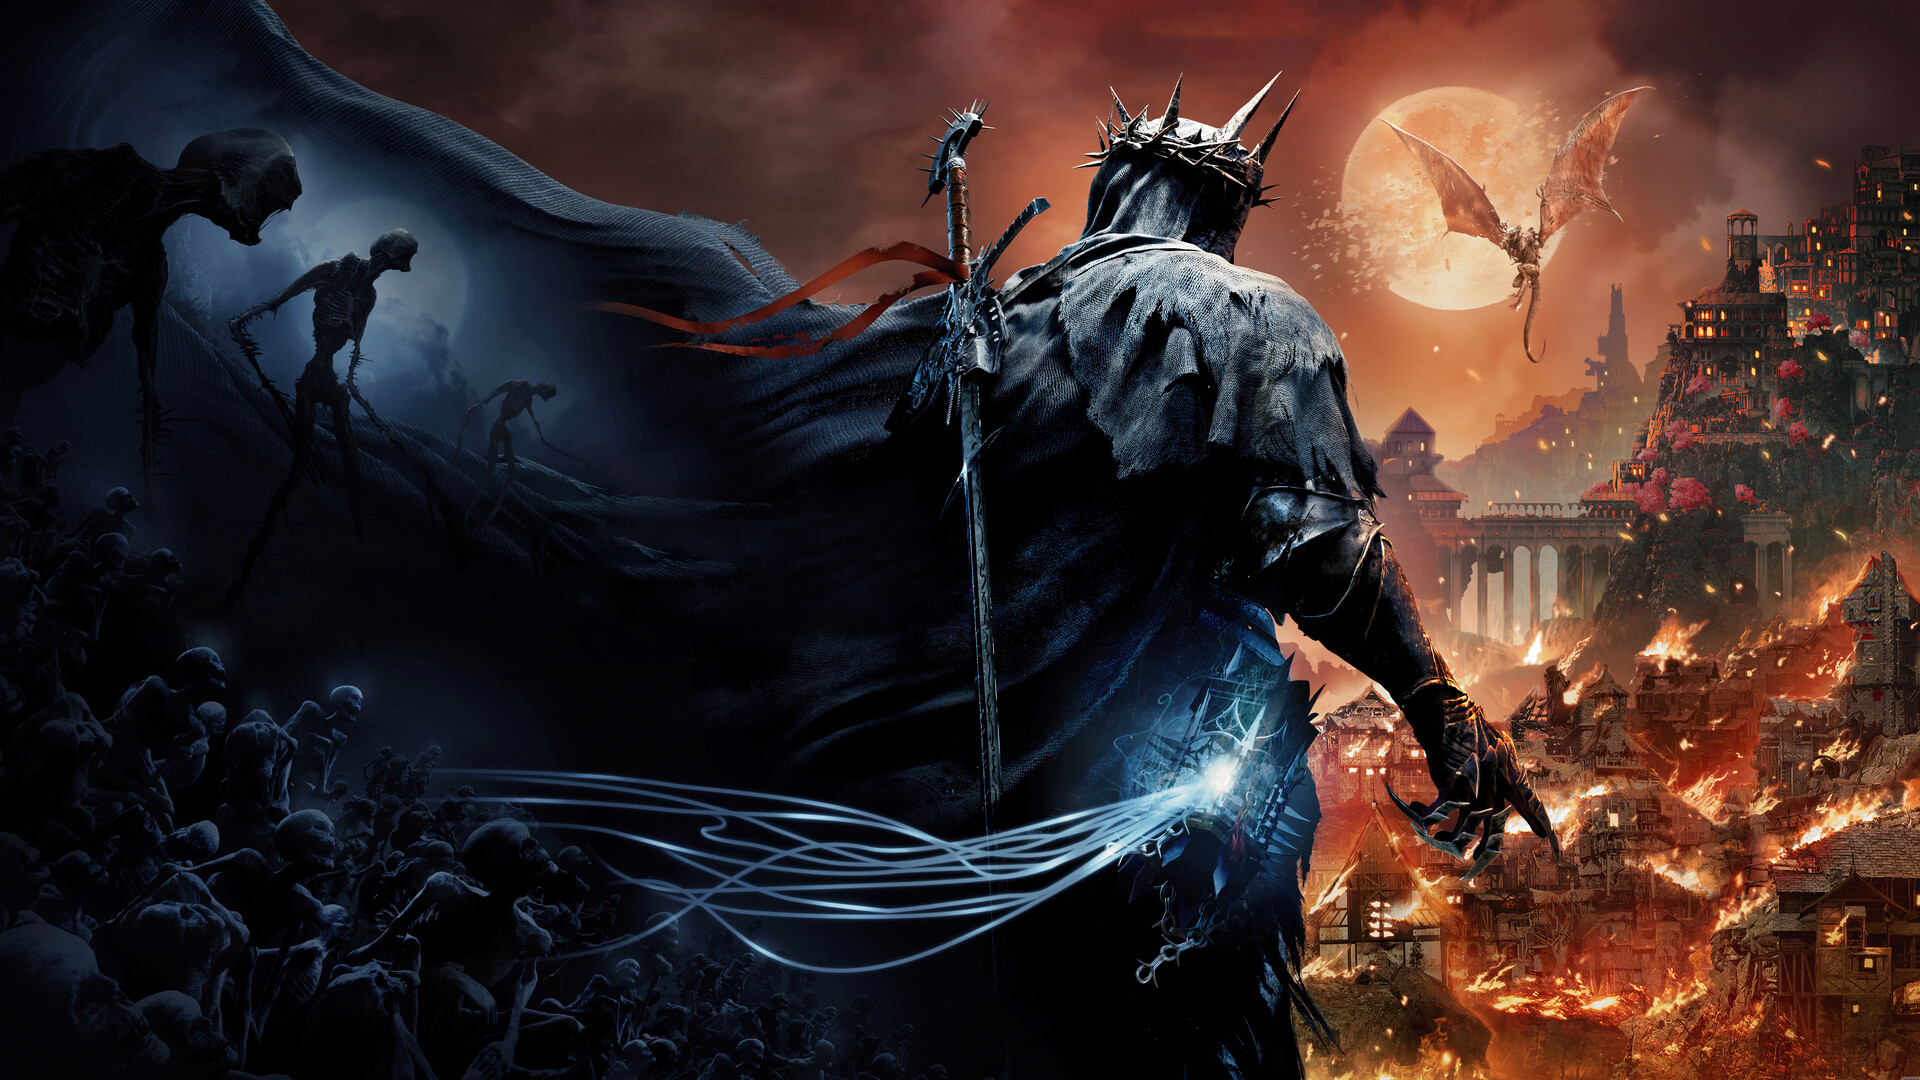 Lords of the Fallen release date, trailer, and more